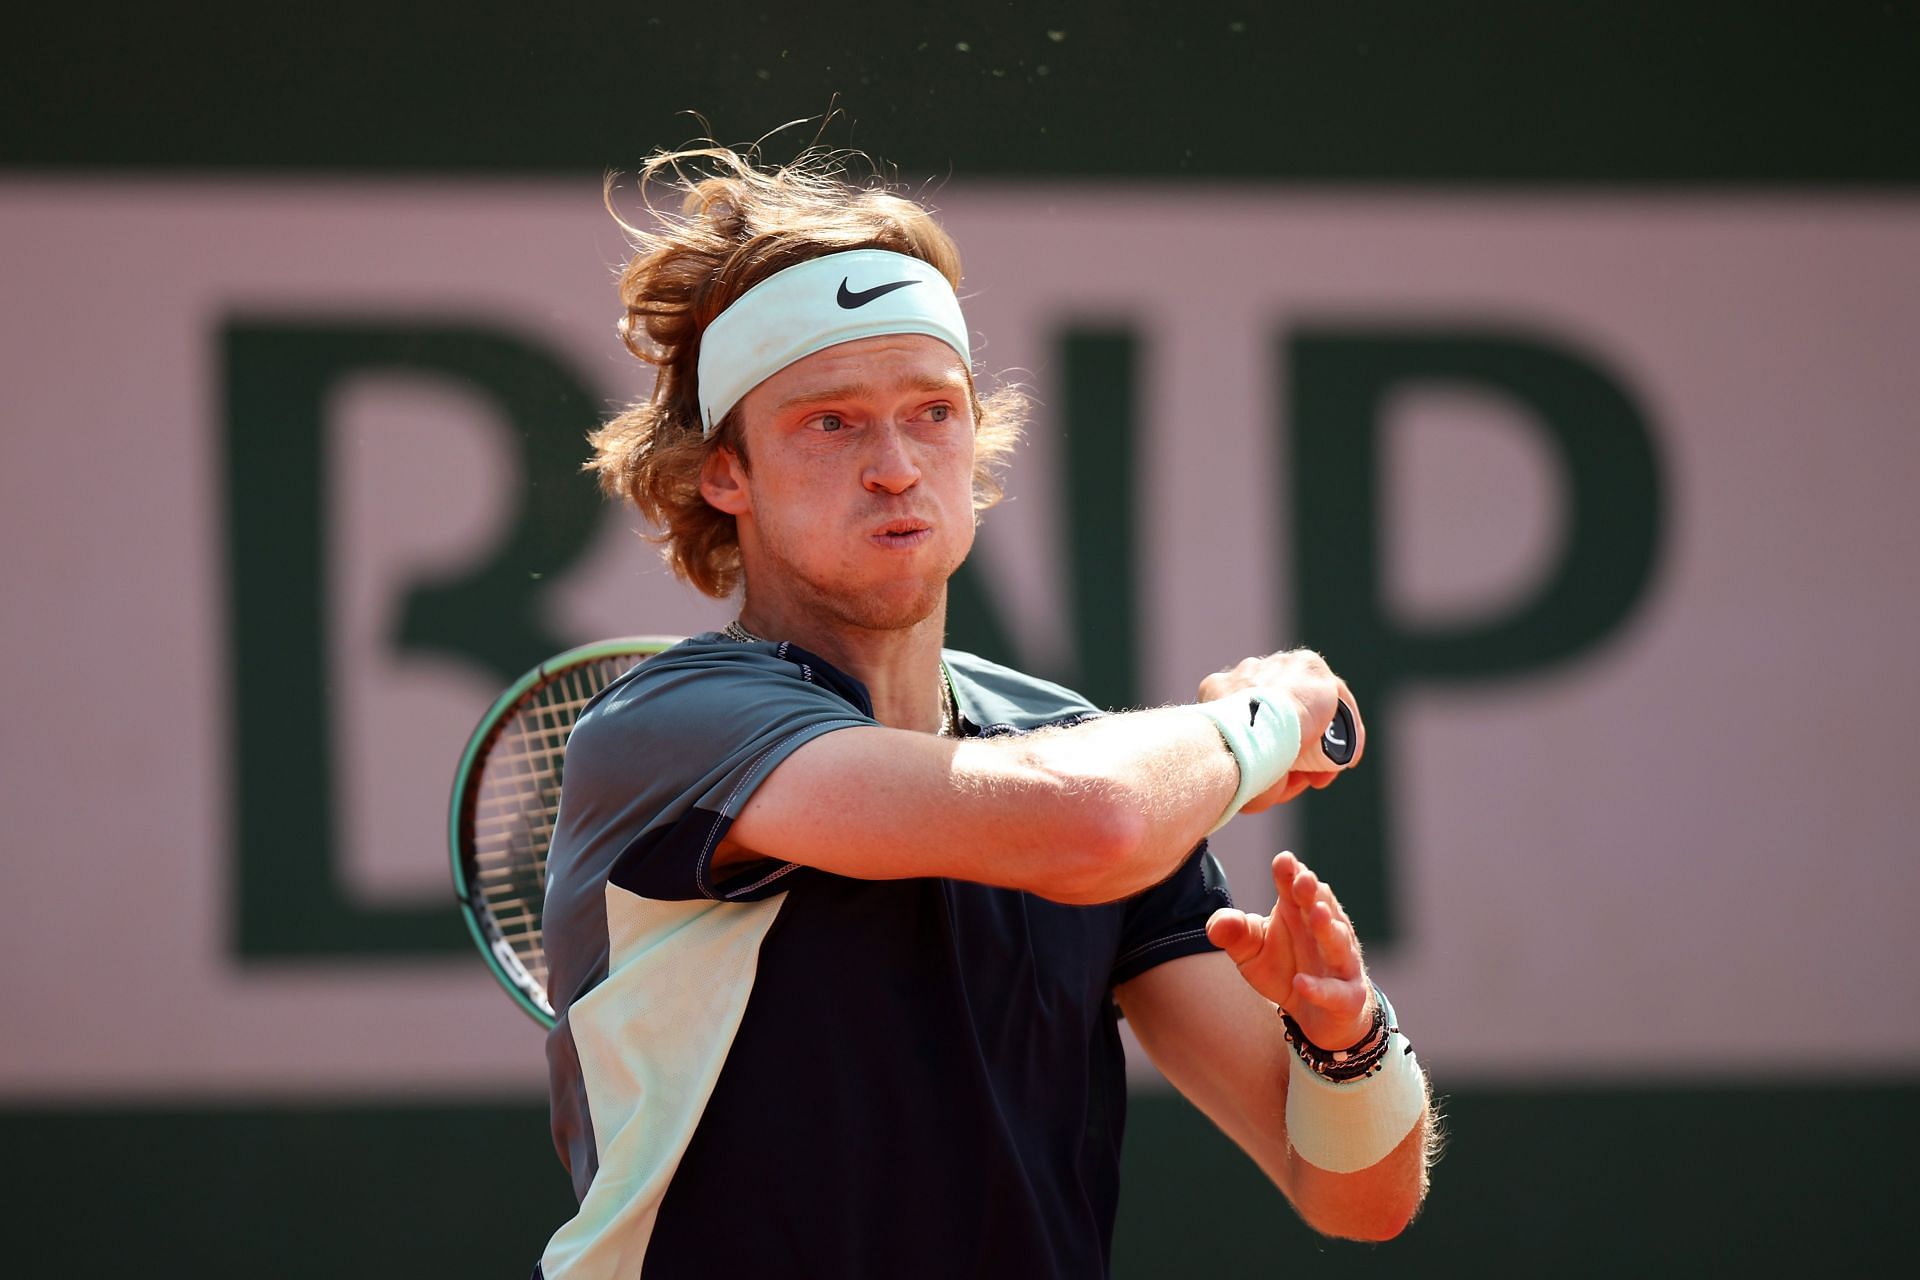 Andrey Rublev at the 2022 French Open - Day Three